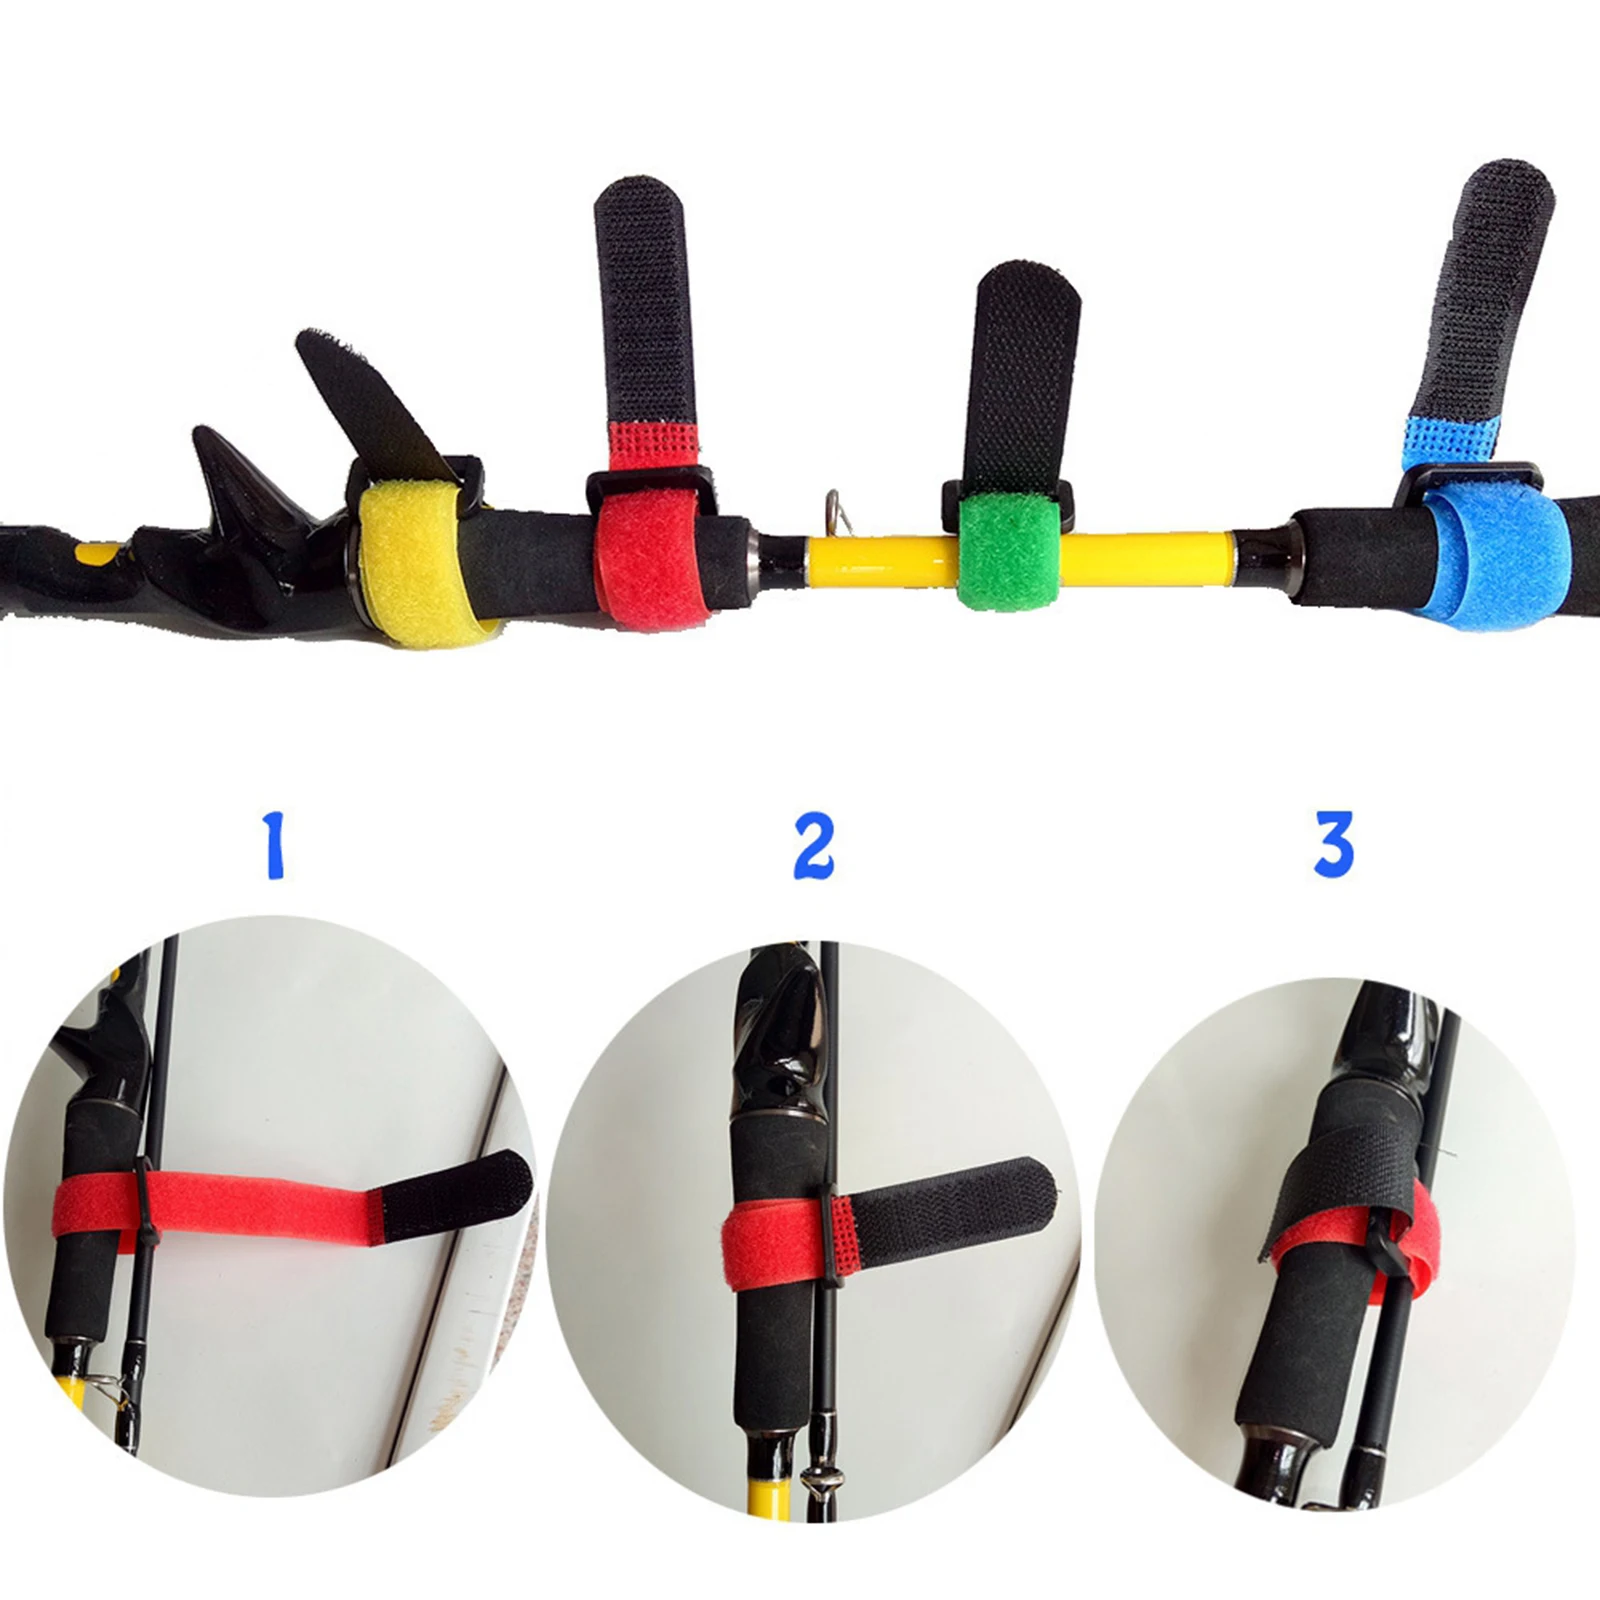 10Pcs Fishing Rod Tie Strap Belt Tackle Reusable Wrap Band Pole Holder Band Casting Spinning Rod Protecting Fishing Rod Bag